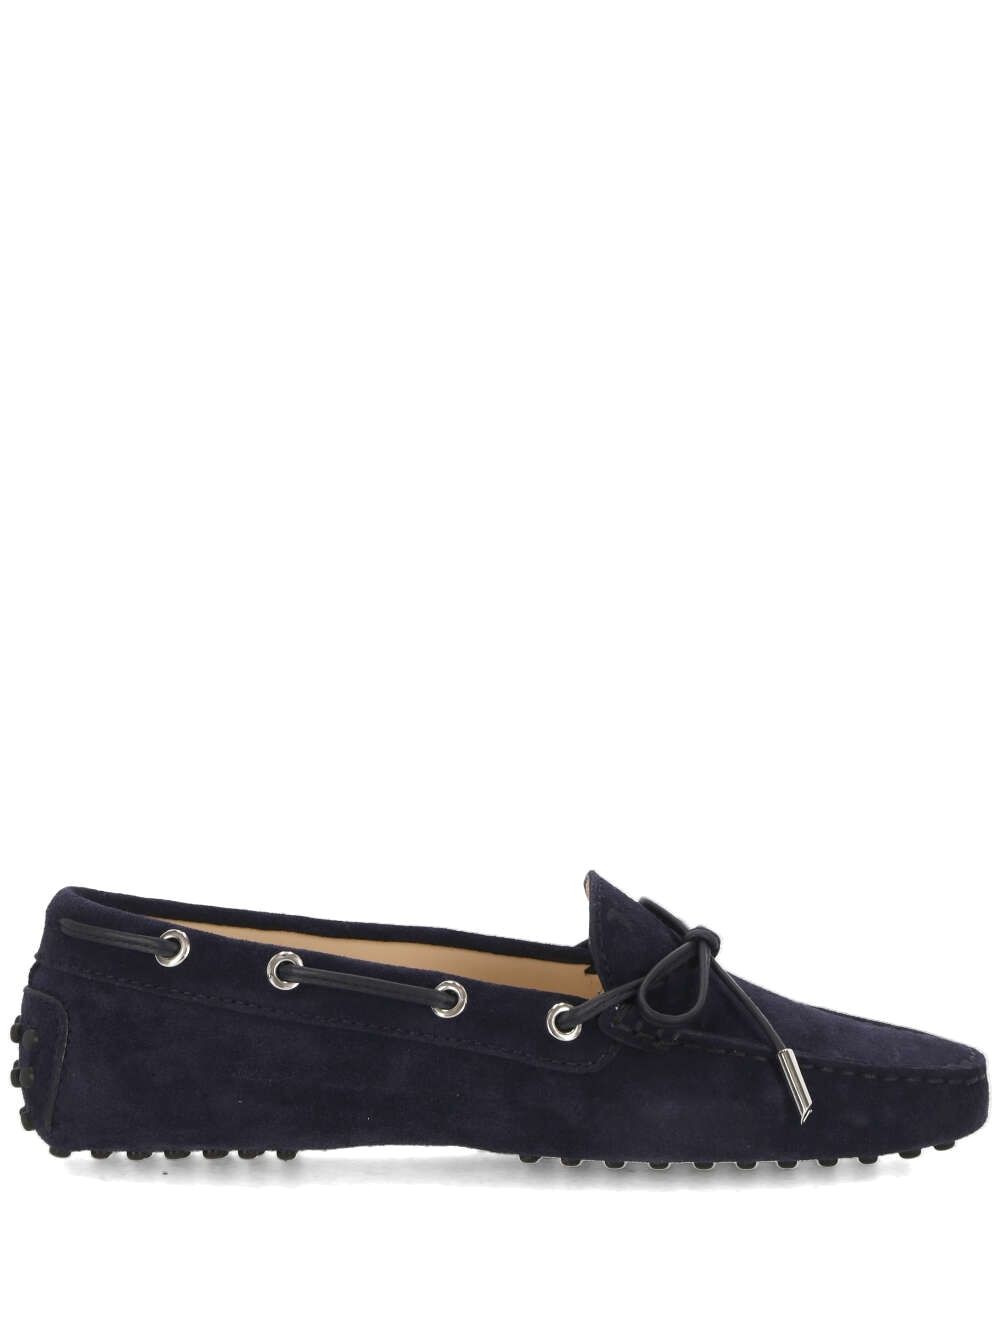 Gommino loafers in dark blue suede